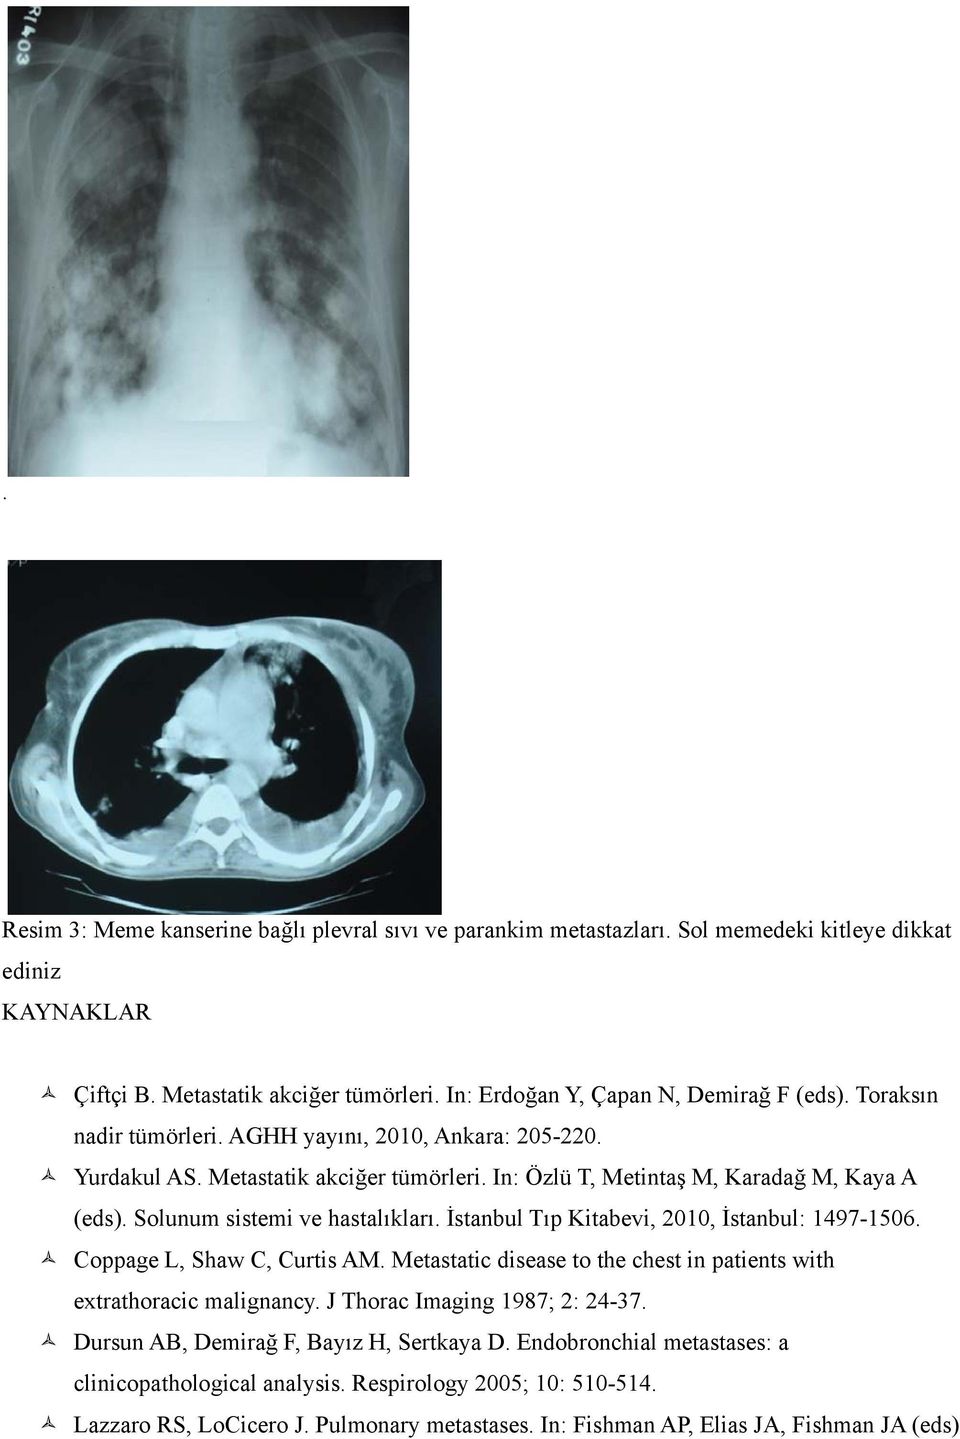 İstanbul Tıp Kitabevi, 2010, İstanbul: 1497-1506. Coppage L, Shaw C, Curtis AM. Metastatic disease to the chest in patients with extrathoracic malignancy. J Thorac Imaging 1987; 2: 24-37.